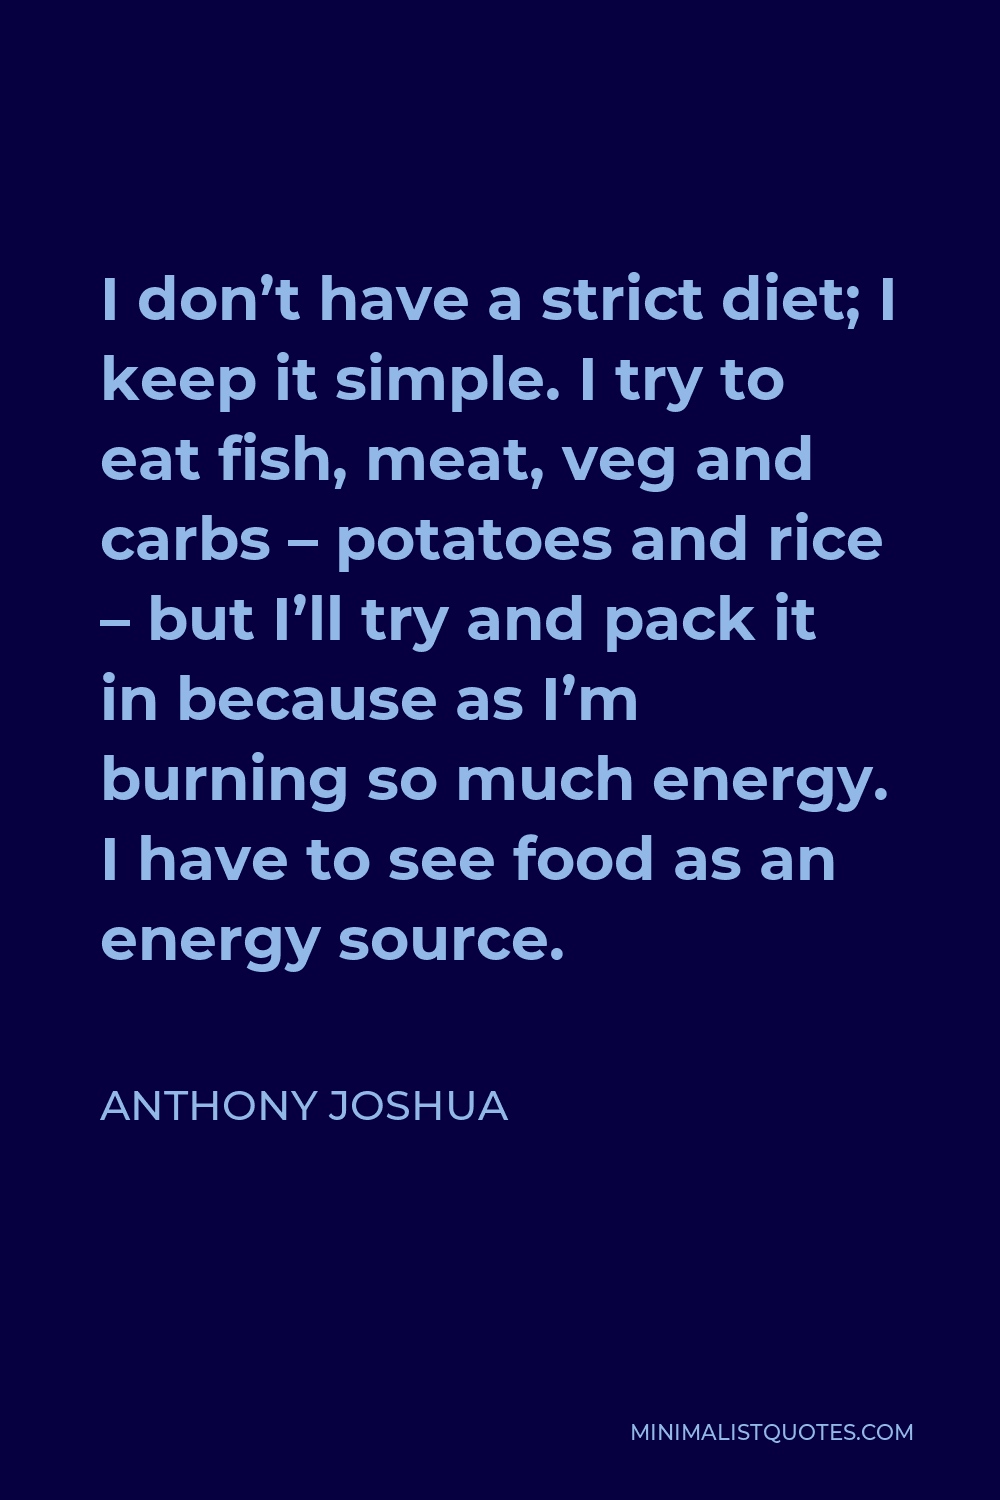 Anthony Joshua Quote - I don’t have a strict diet; I keep it simple. I try to eat fish, meat, veg and carbs – potatoes and rice – but I’ll try and pack it in because as I’m burning so much energy. I have to see food as an energy source.